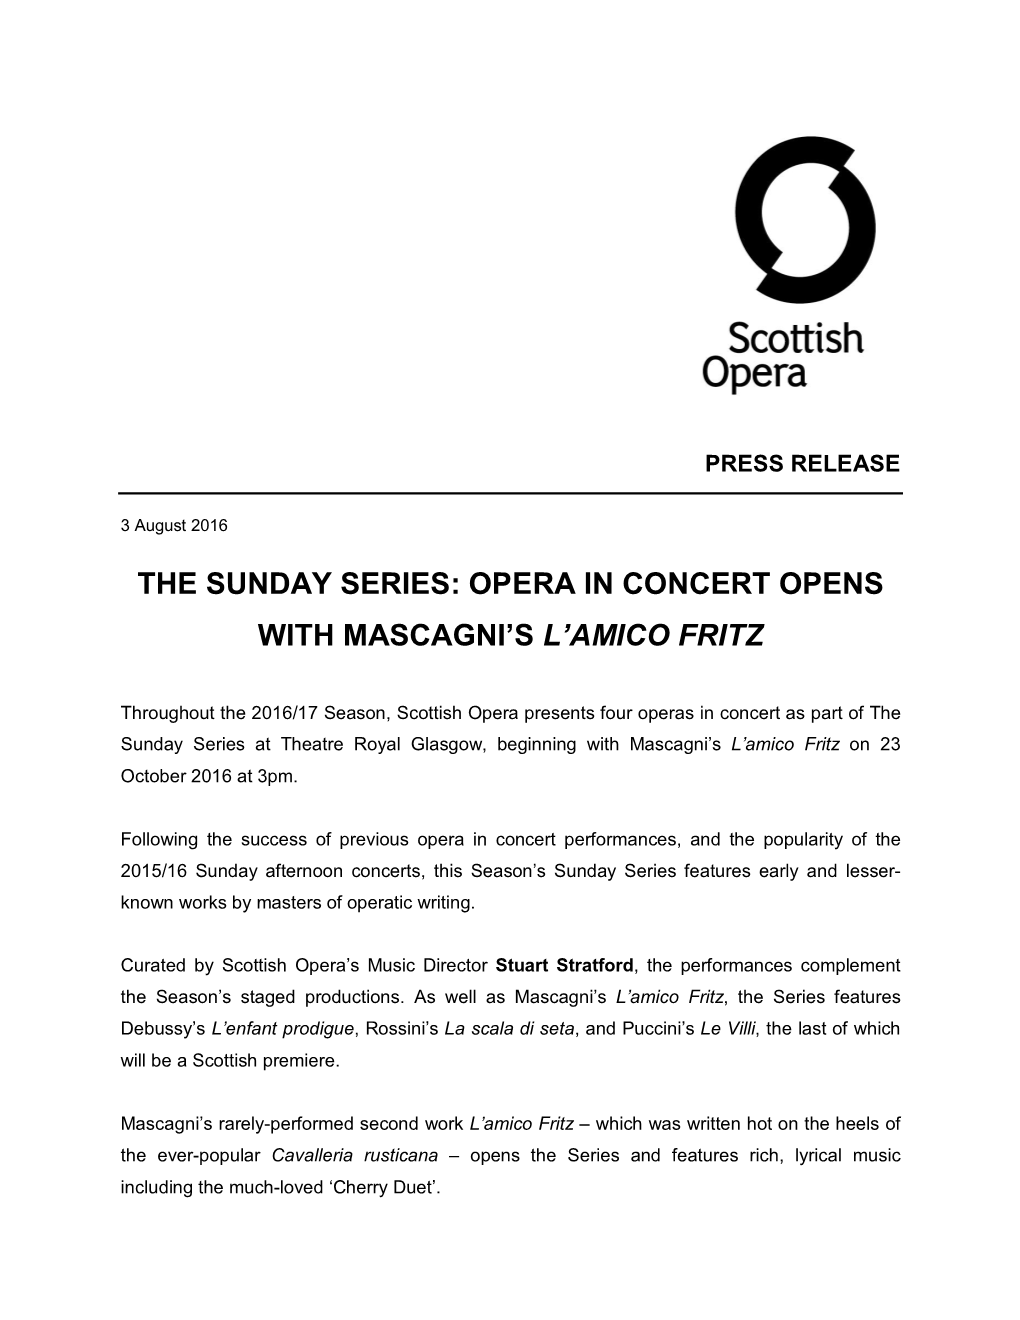 Opera in Concert Opens with Mascagni's L